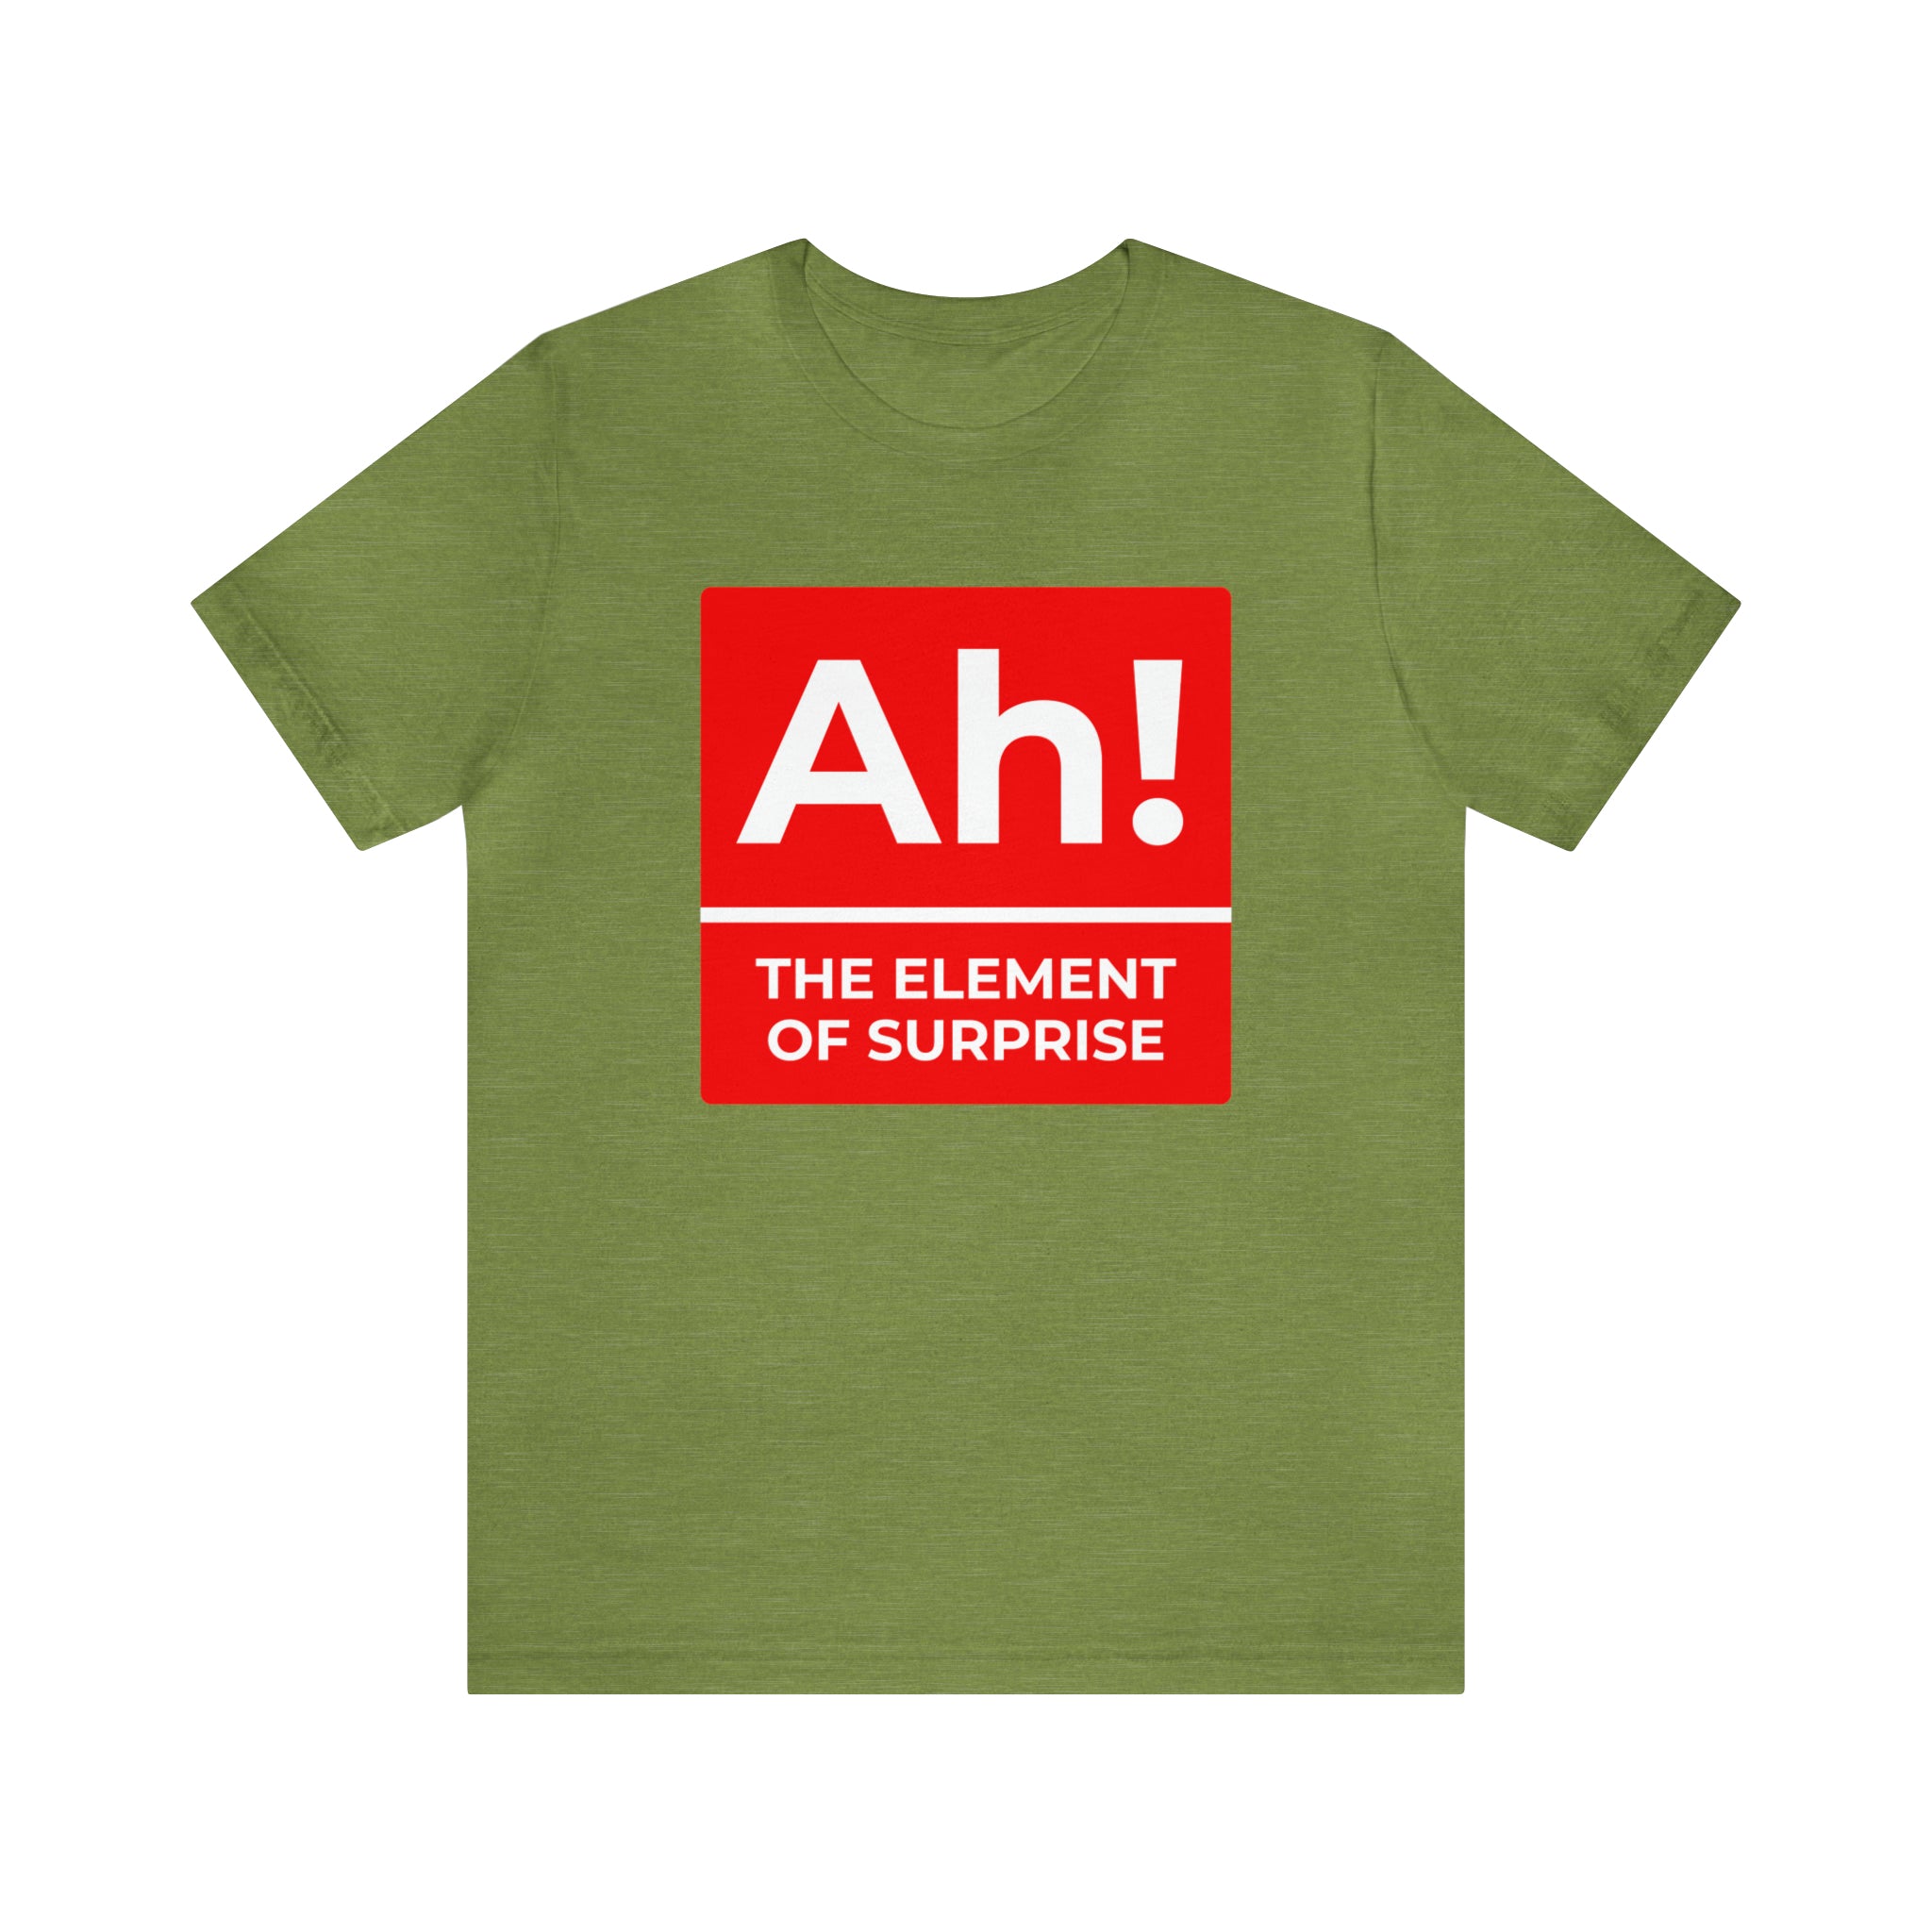 Product Name: Ah! the Element of Surprise Biology T-shirt